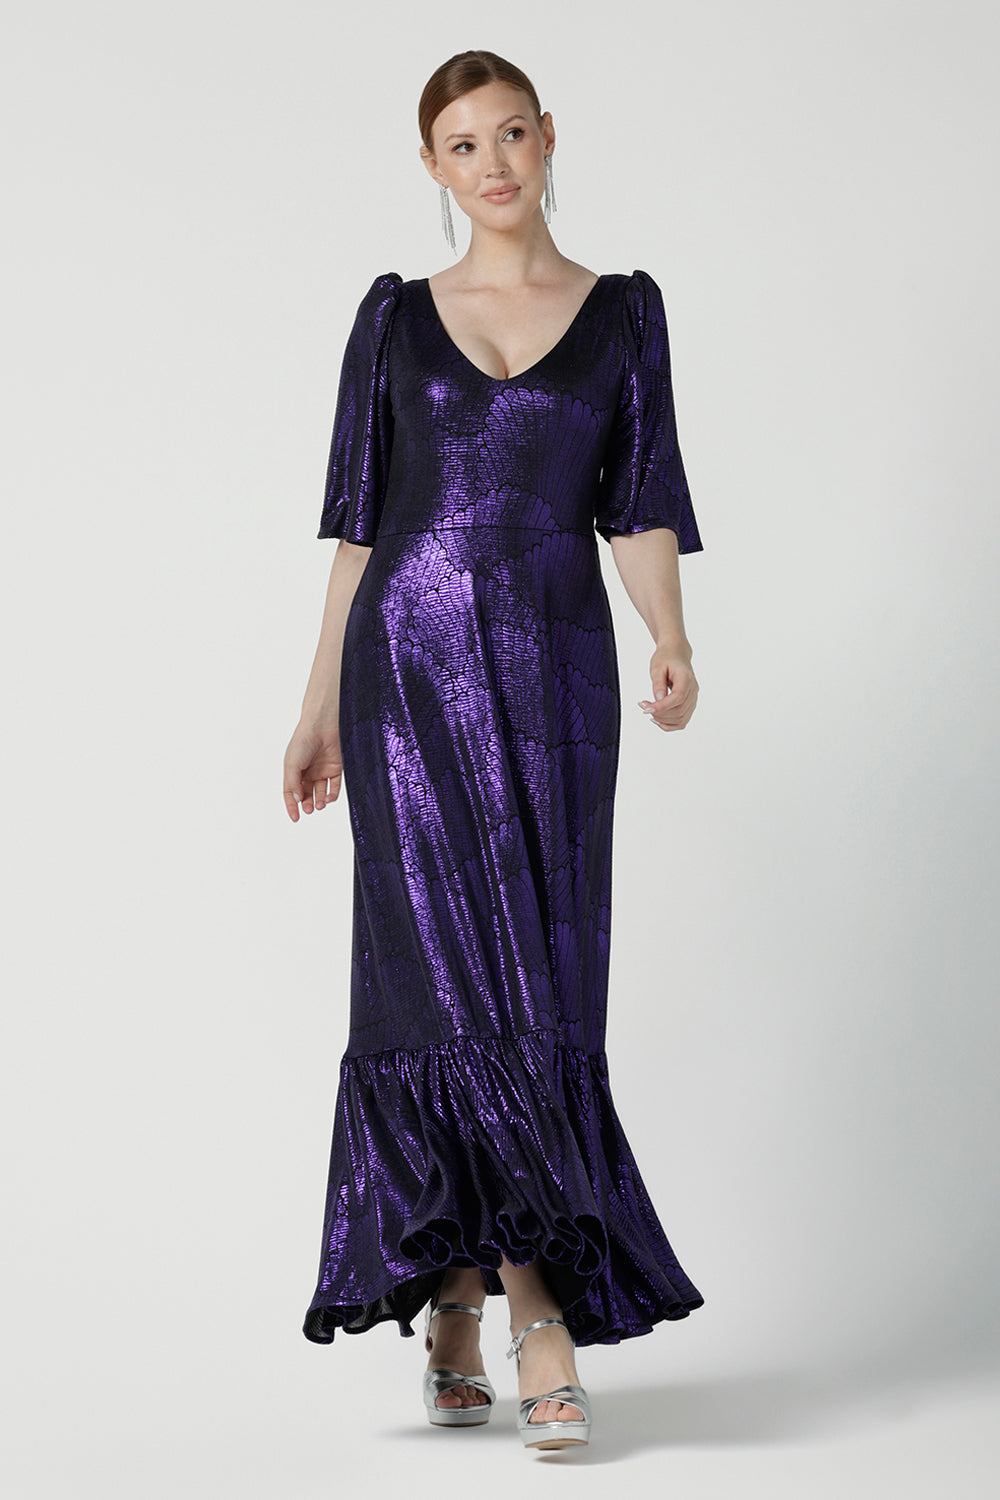 A size 10 woman wears a glamorous maxi dress with a ruffle hem and low v-neckline. Featuring a flutter sleeve and made in shiny purple jersey with a foil print. Made in Australia for women for evening gown cocktail wear. Size 8 - 24.